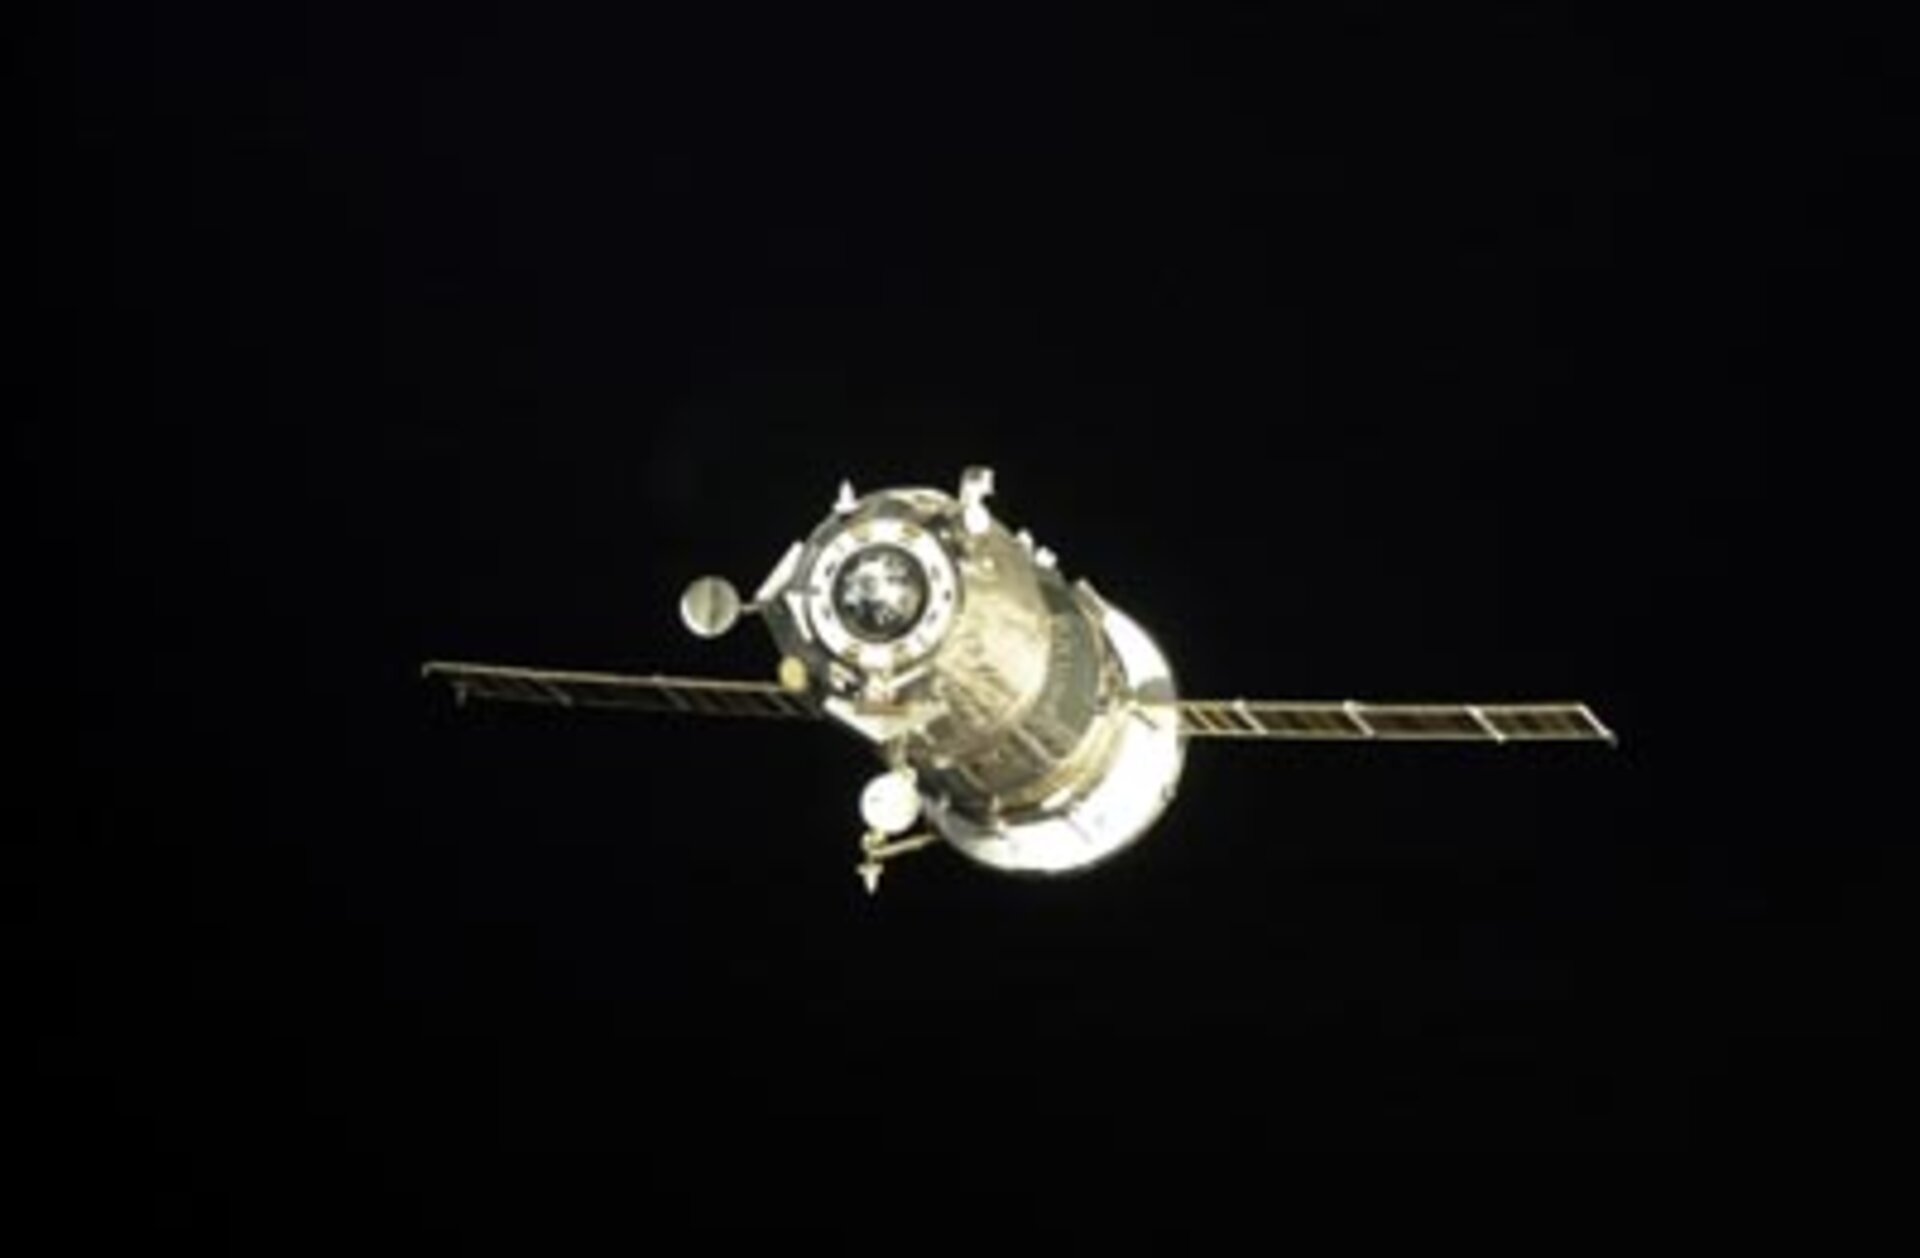 Progress approaches the aft docking port on the Zvezda Service Module on the ISS